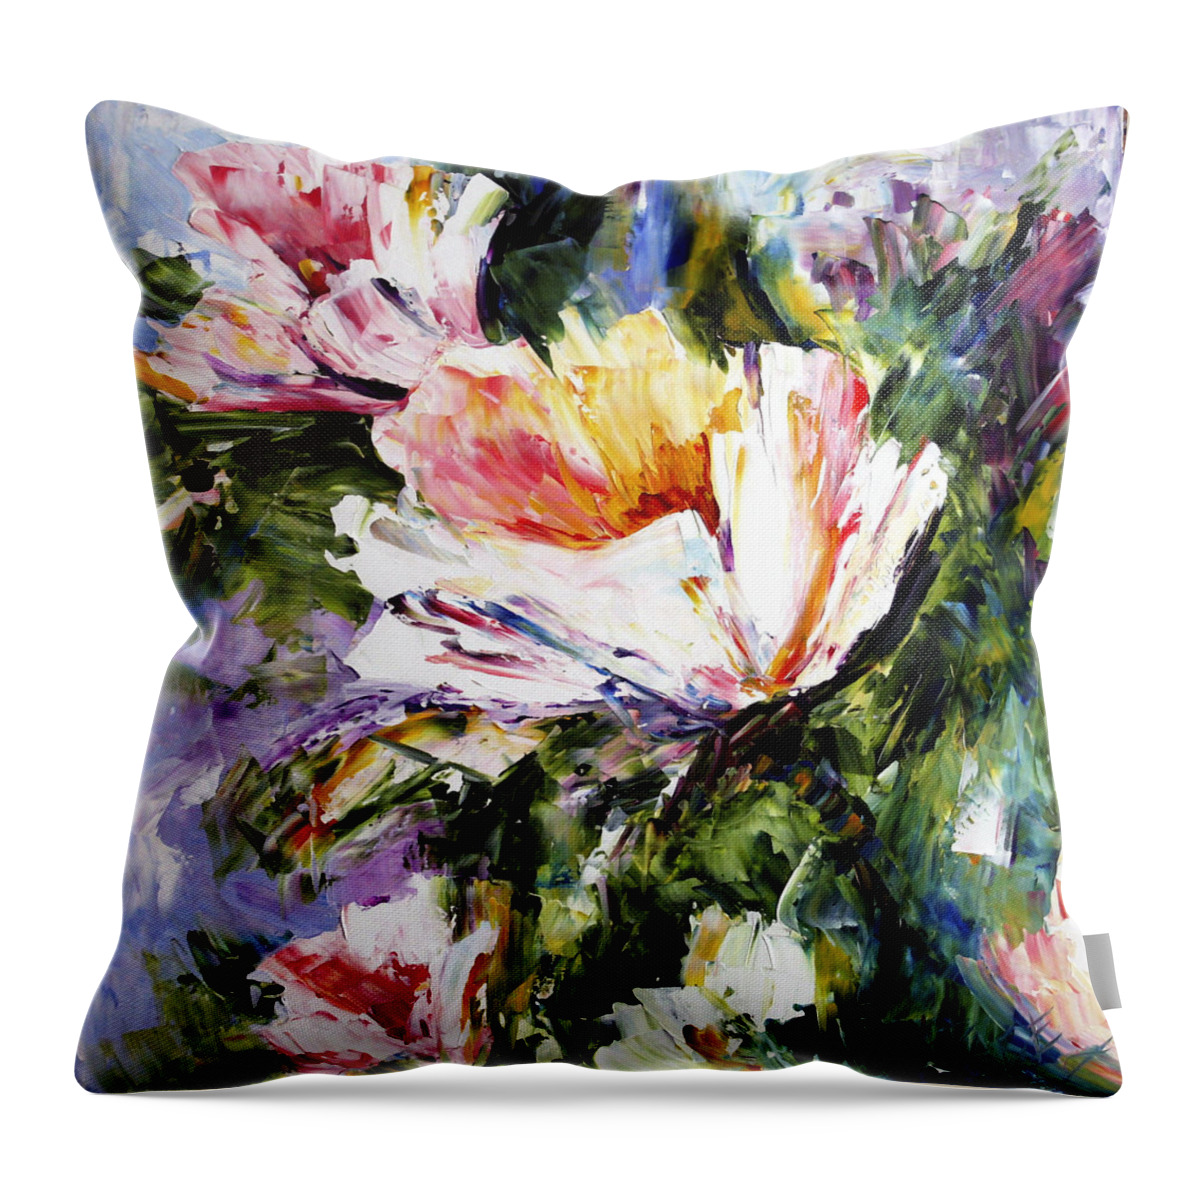 White Flowers Throw Pillow featuring the painting White Flowers by Laurie Pace